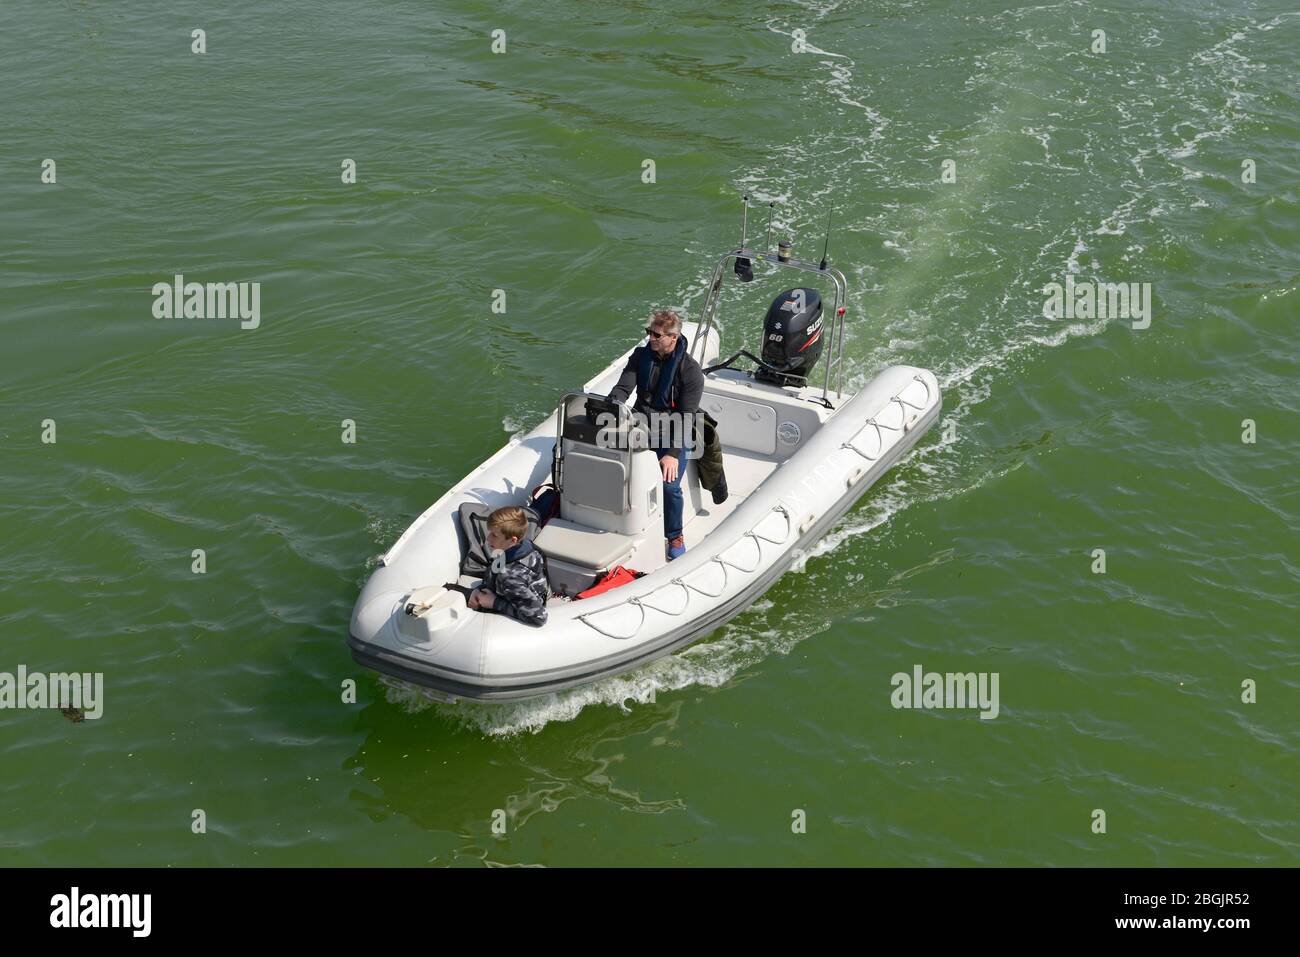 A Zodiac boat approaches a bridge over the river Arun in Littlehamption, West Sussex, UK Stock Photo